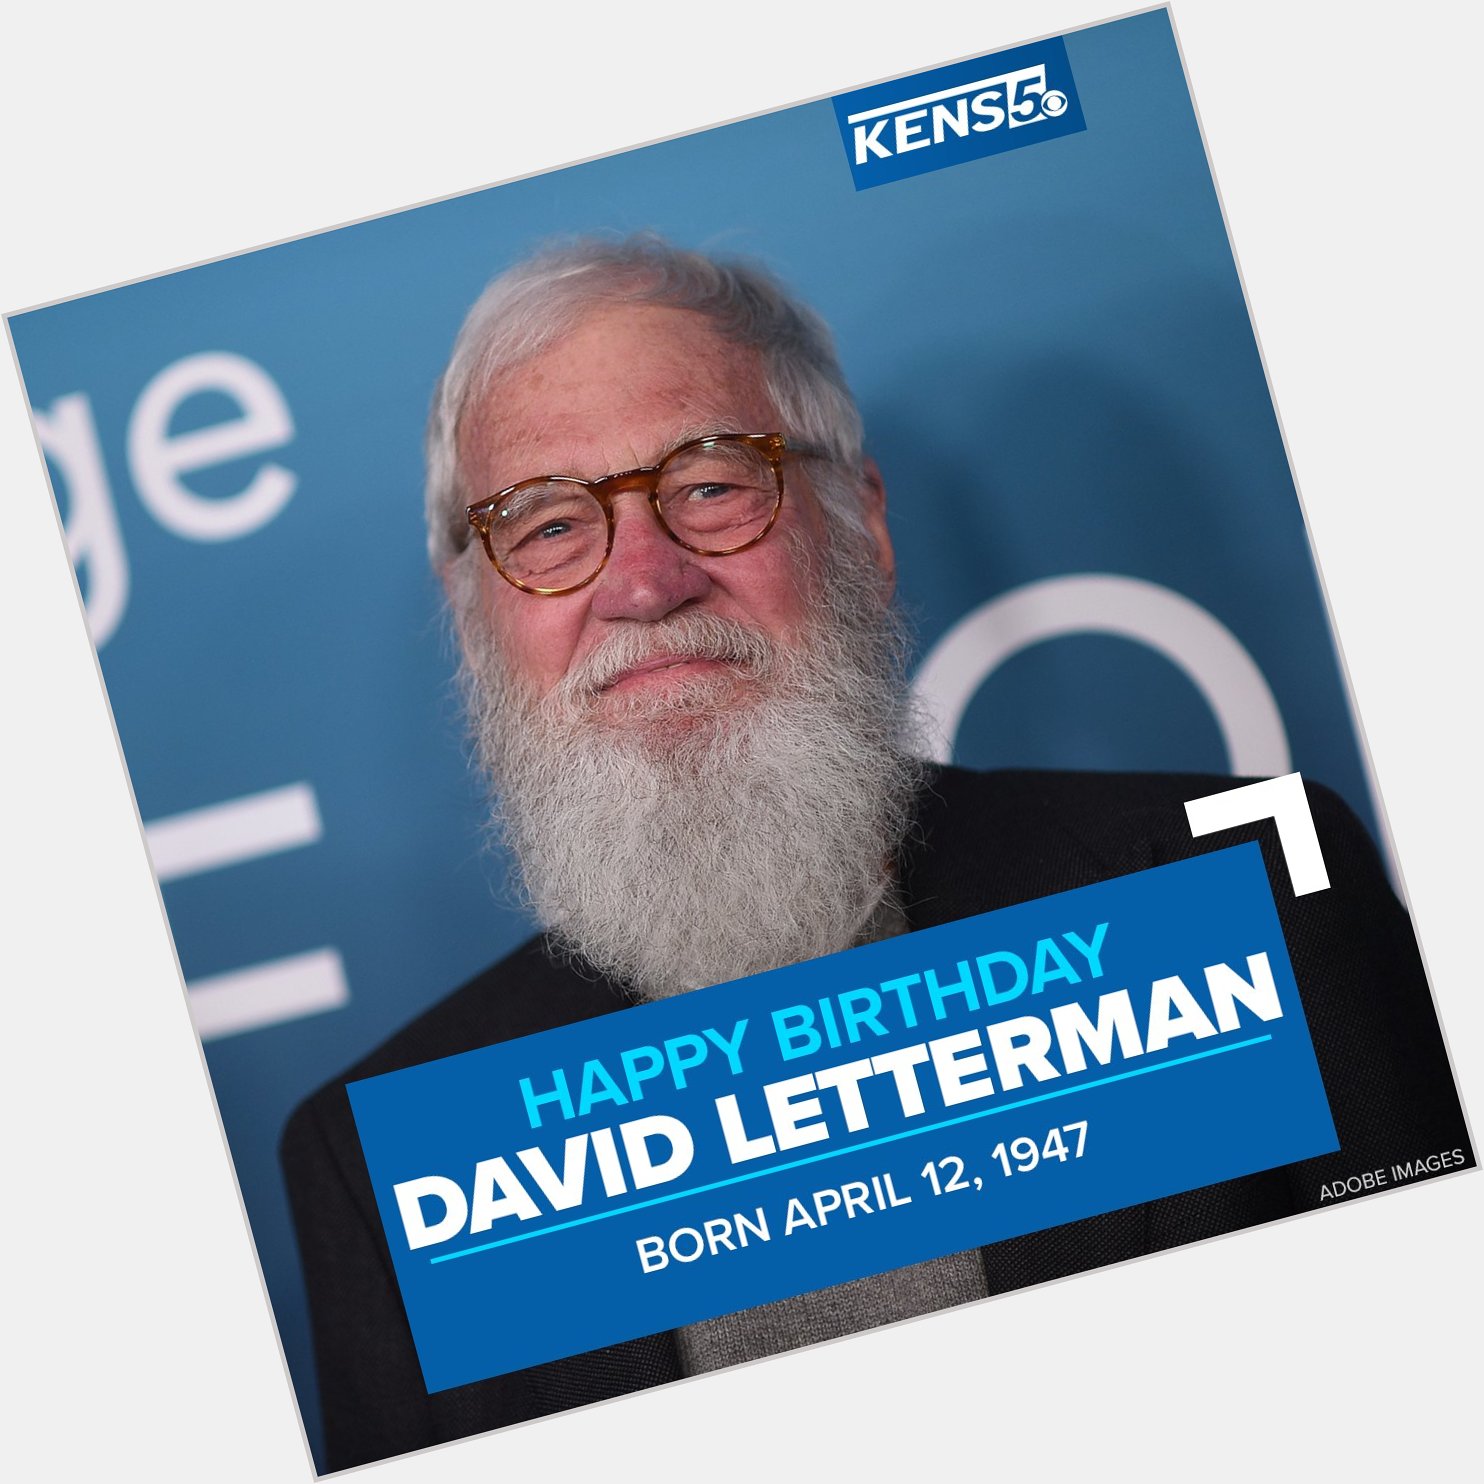 Join us in wishing former late talk show host David Letterman a HAPPY BIRTHDAY! He is 76 years old today.  